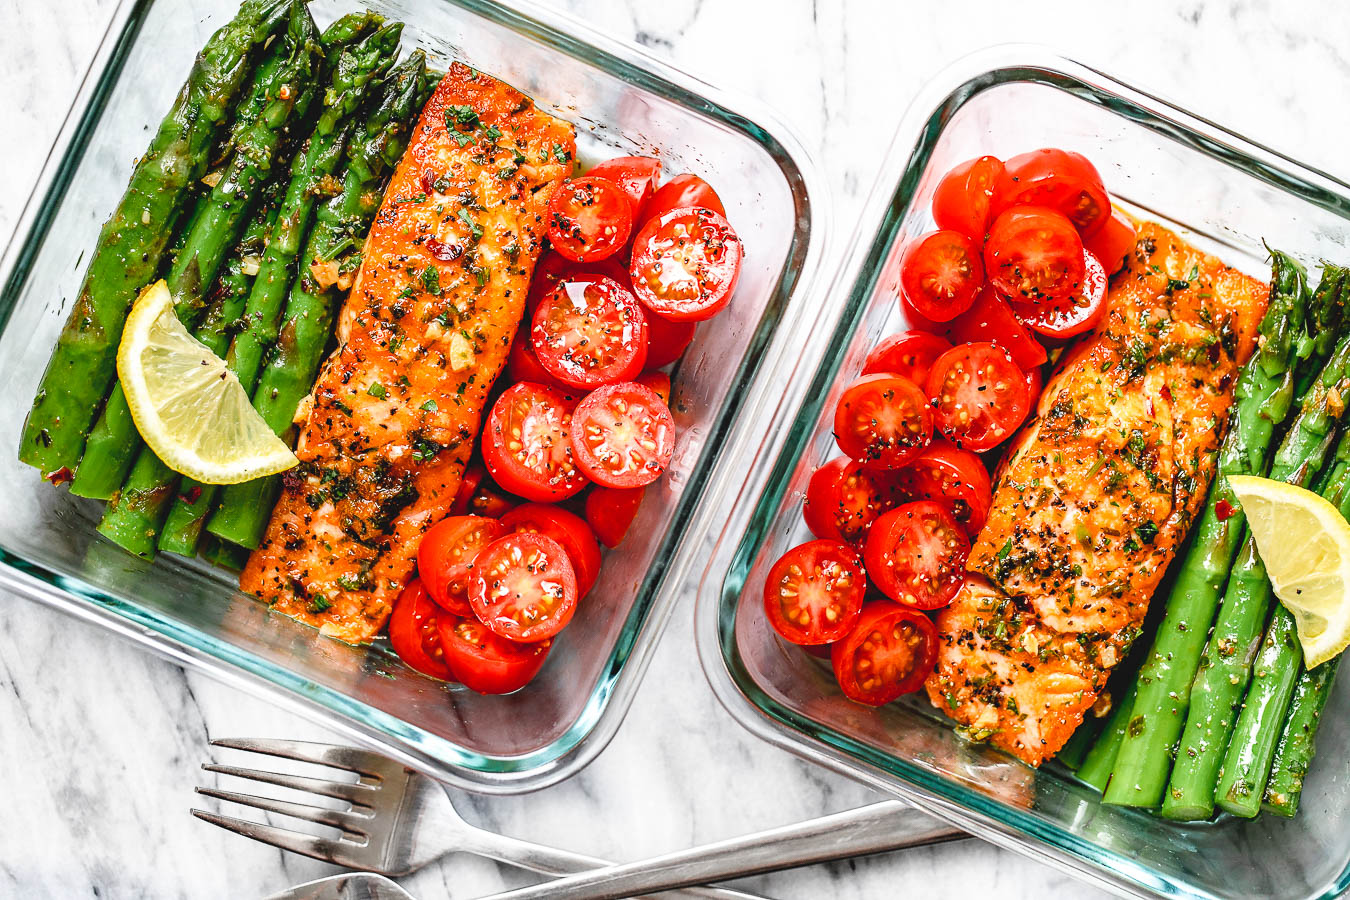 15-Minute Meal-Prep Salmon and Asparagus in Garlic Lemon Butter Sauce